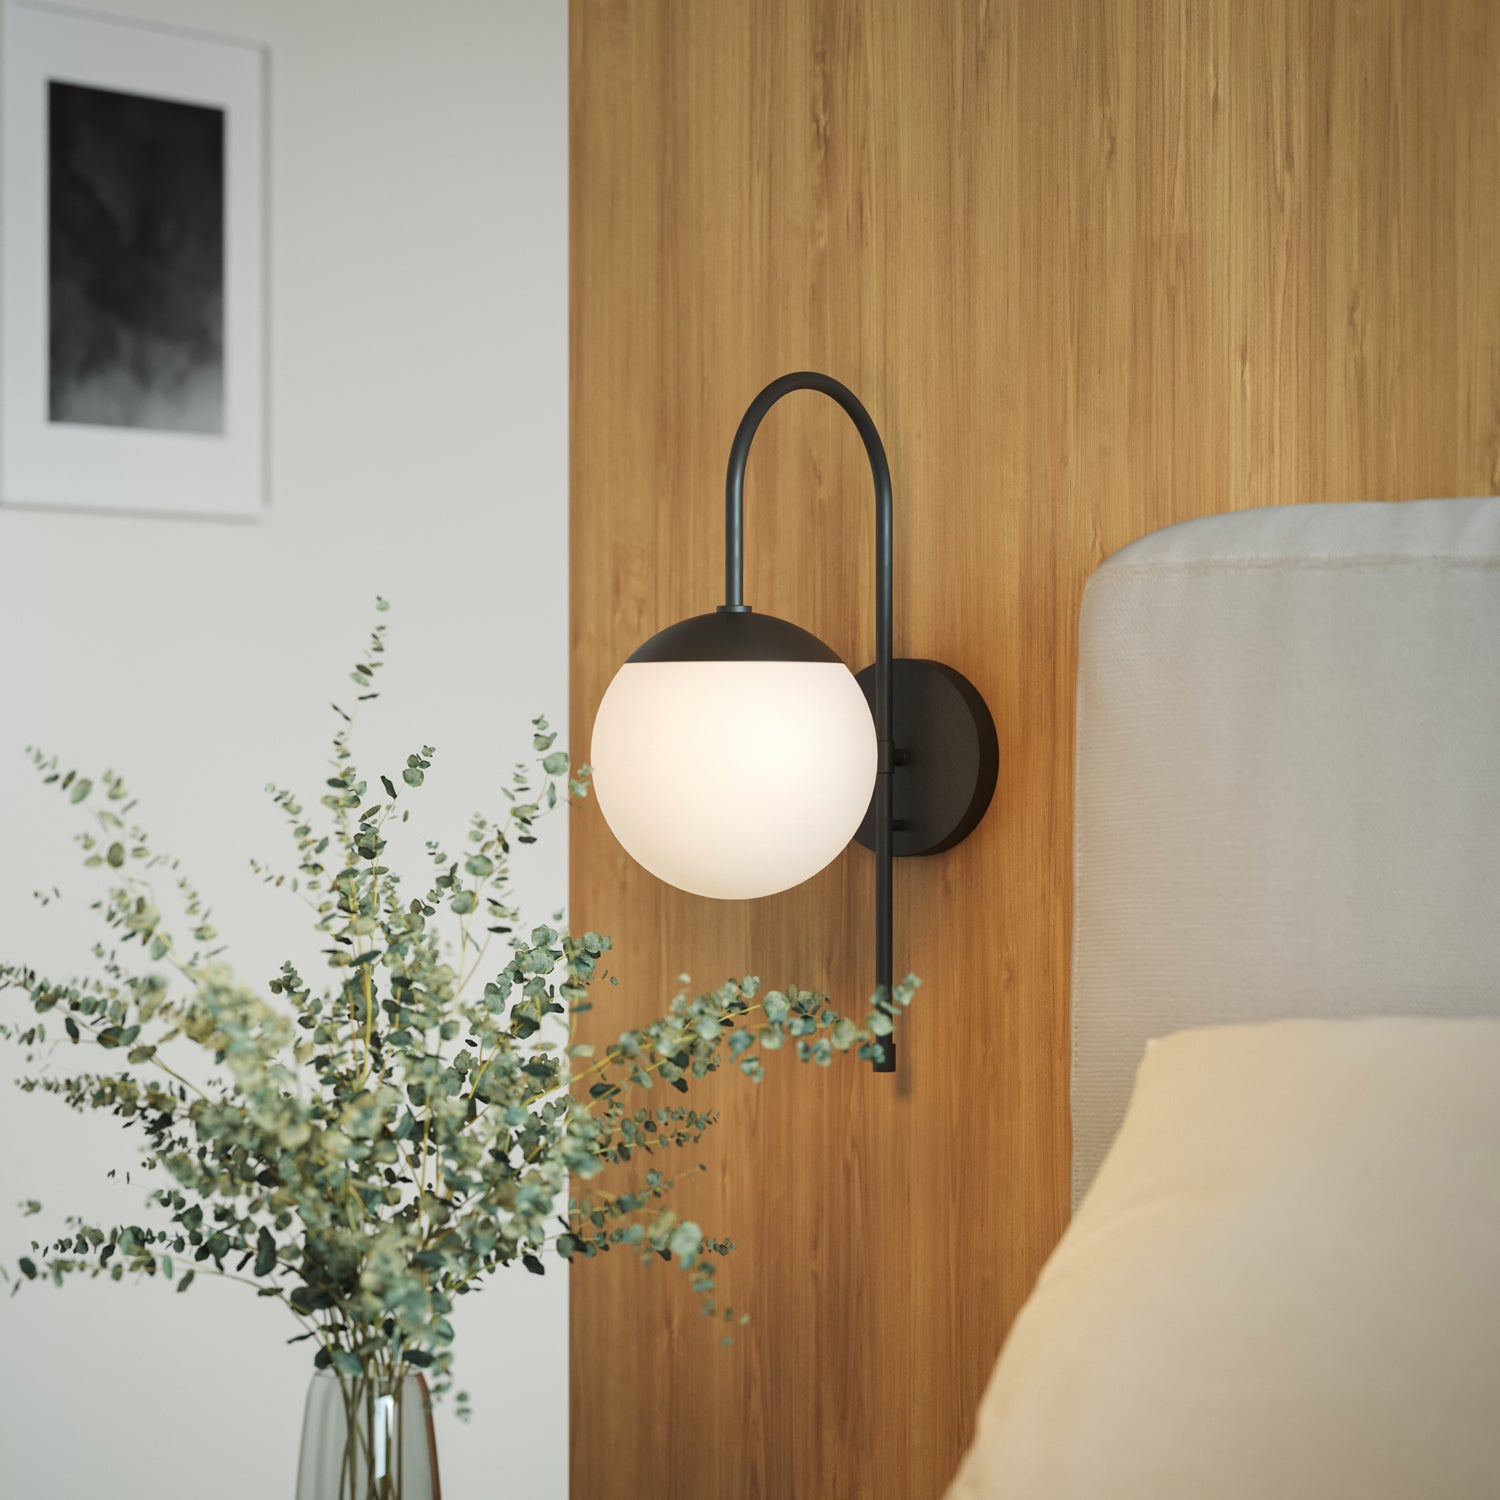 Castell Curved Arm LED Wall Sconce, Matte Black